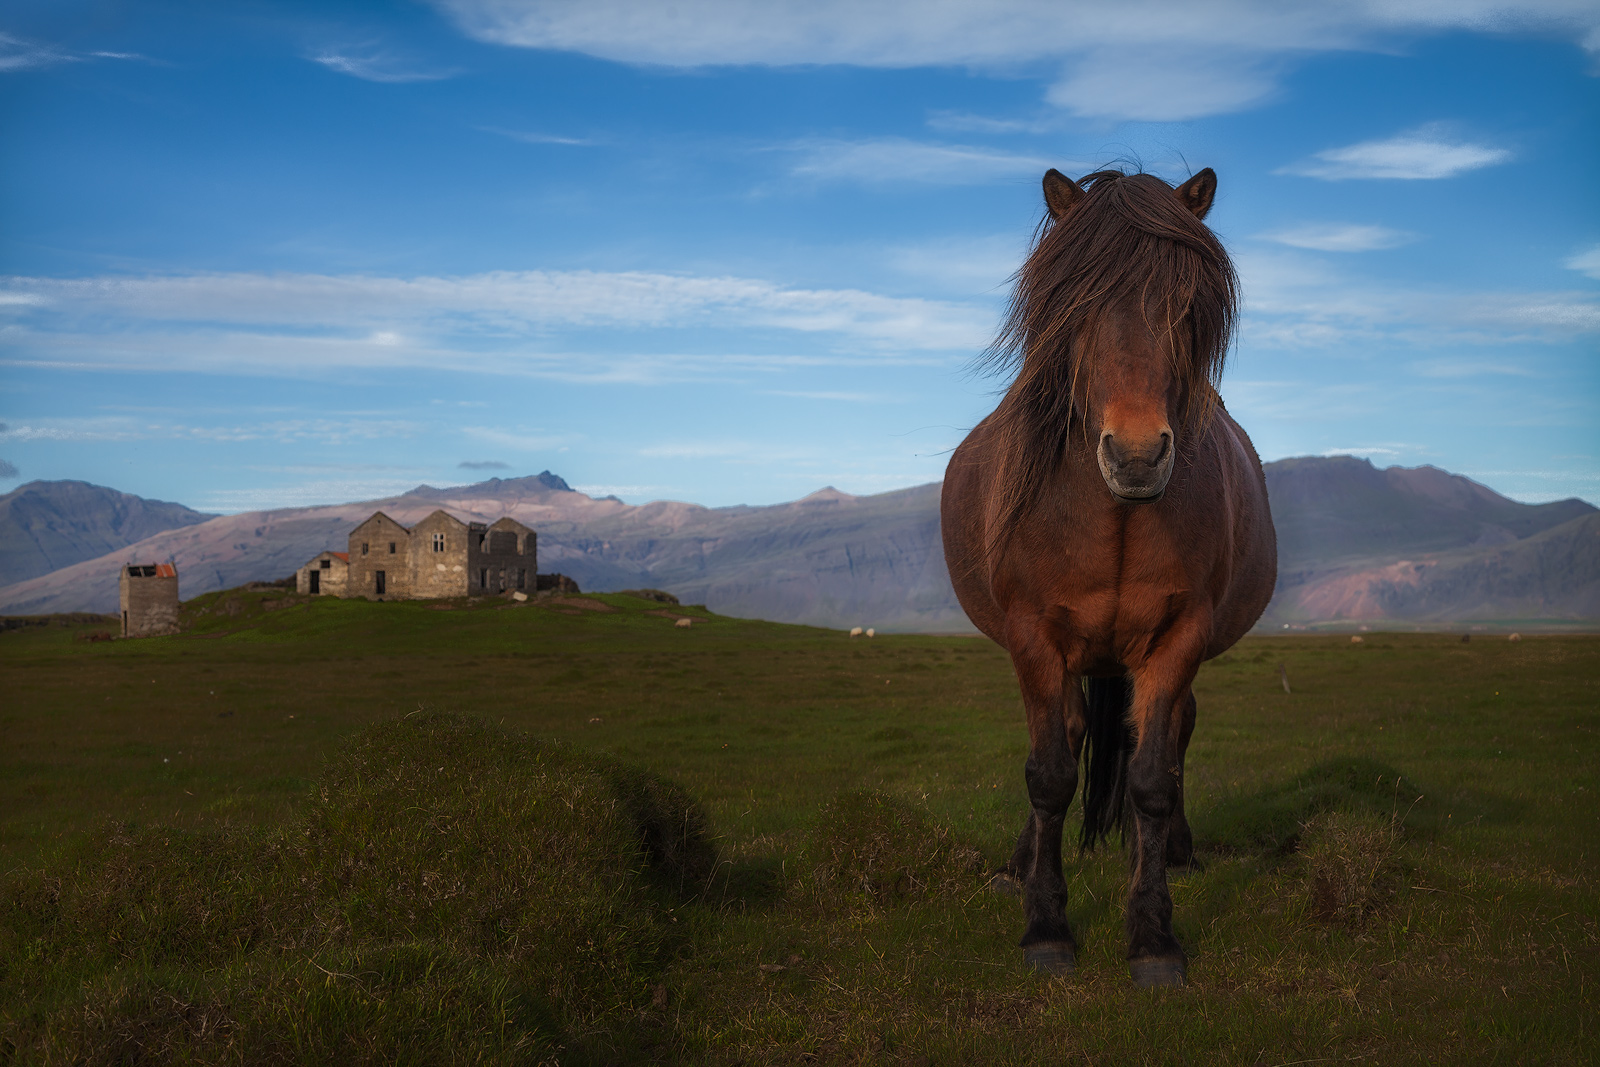 Beautiful horse standing still in a field with a castle in the background